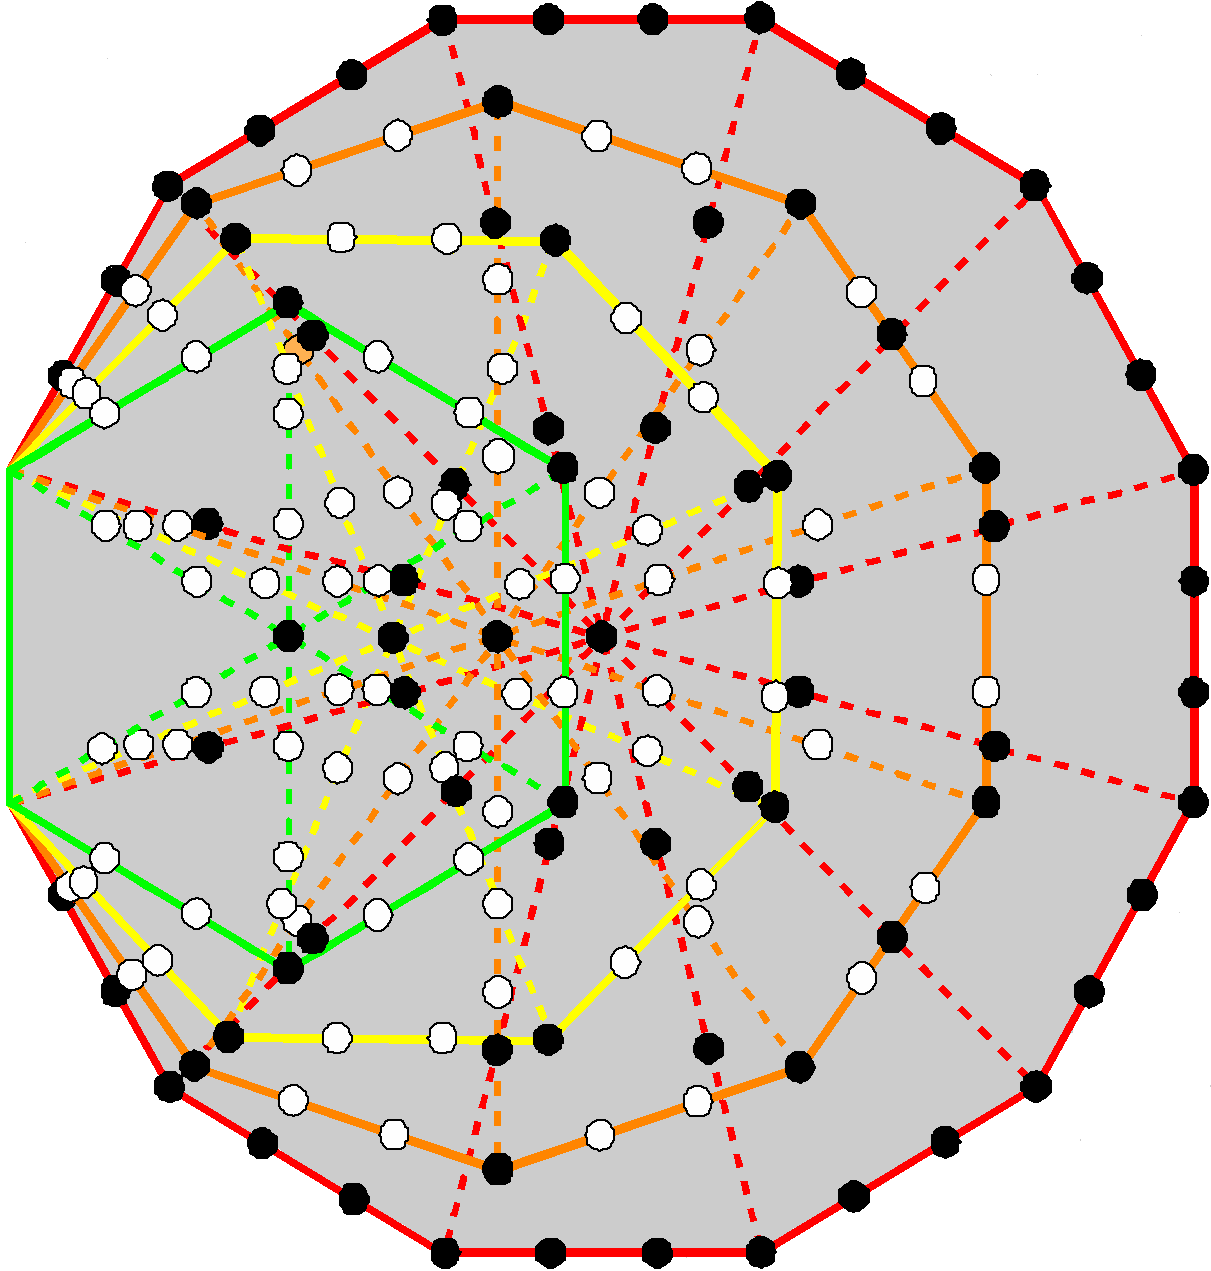 (78+90) boundary yods in last 4 polygons